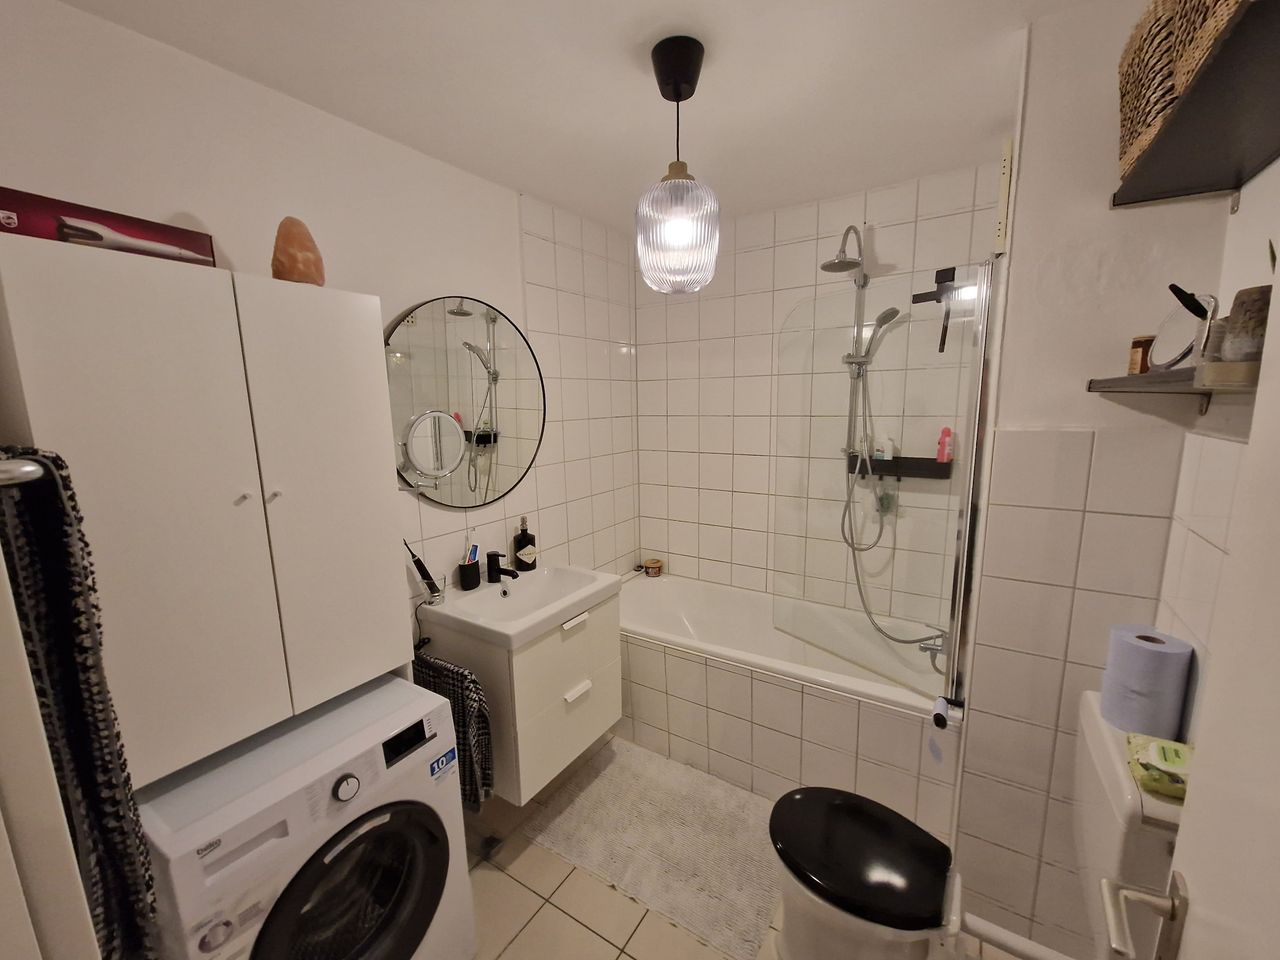 Charming 100sqm in the heart of Cologne / 2 balconies, 4 rooms